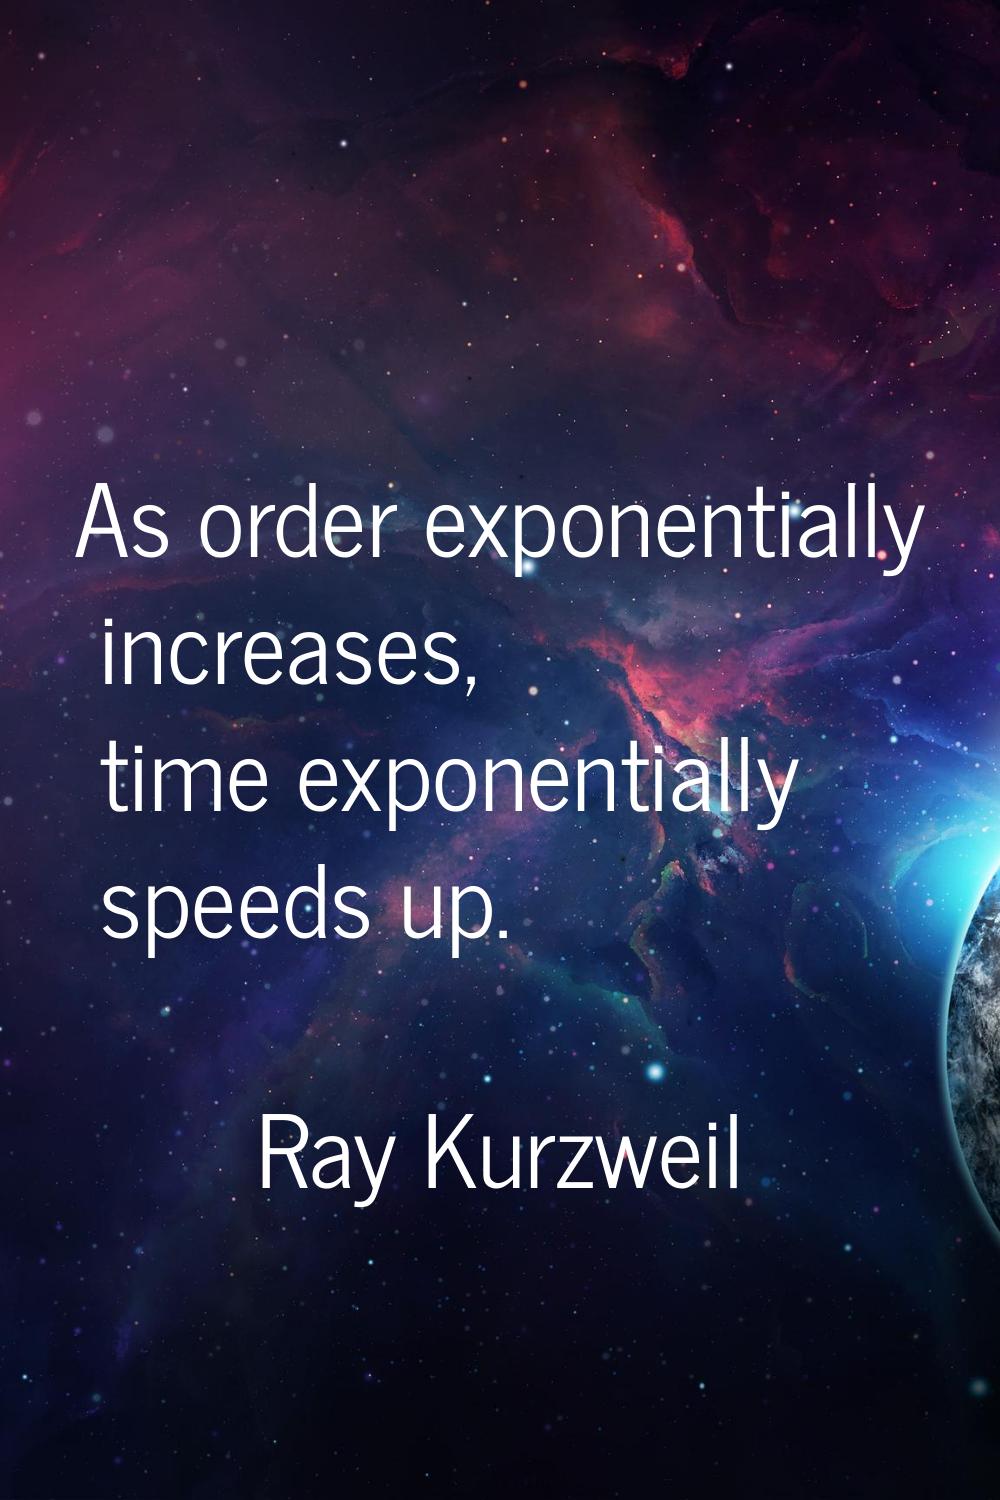 As order exponentially increases, time exponentially speeds up.